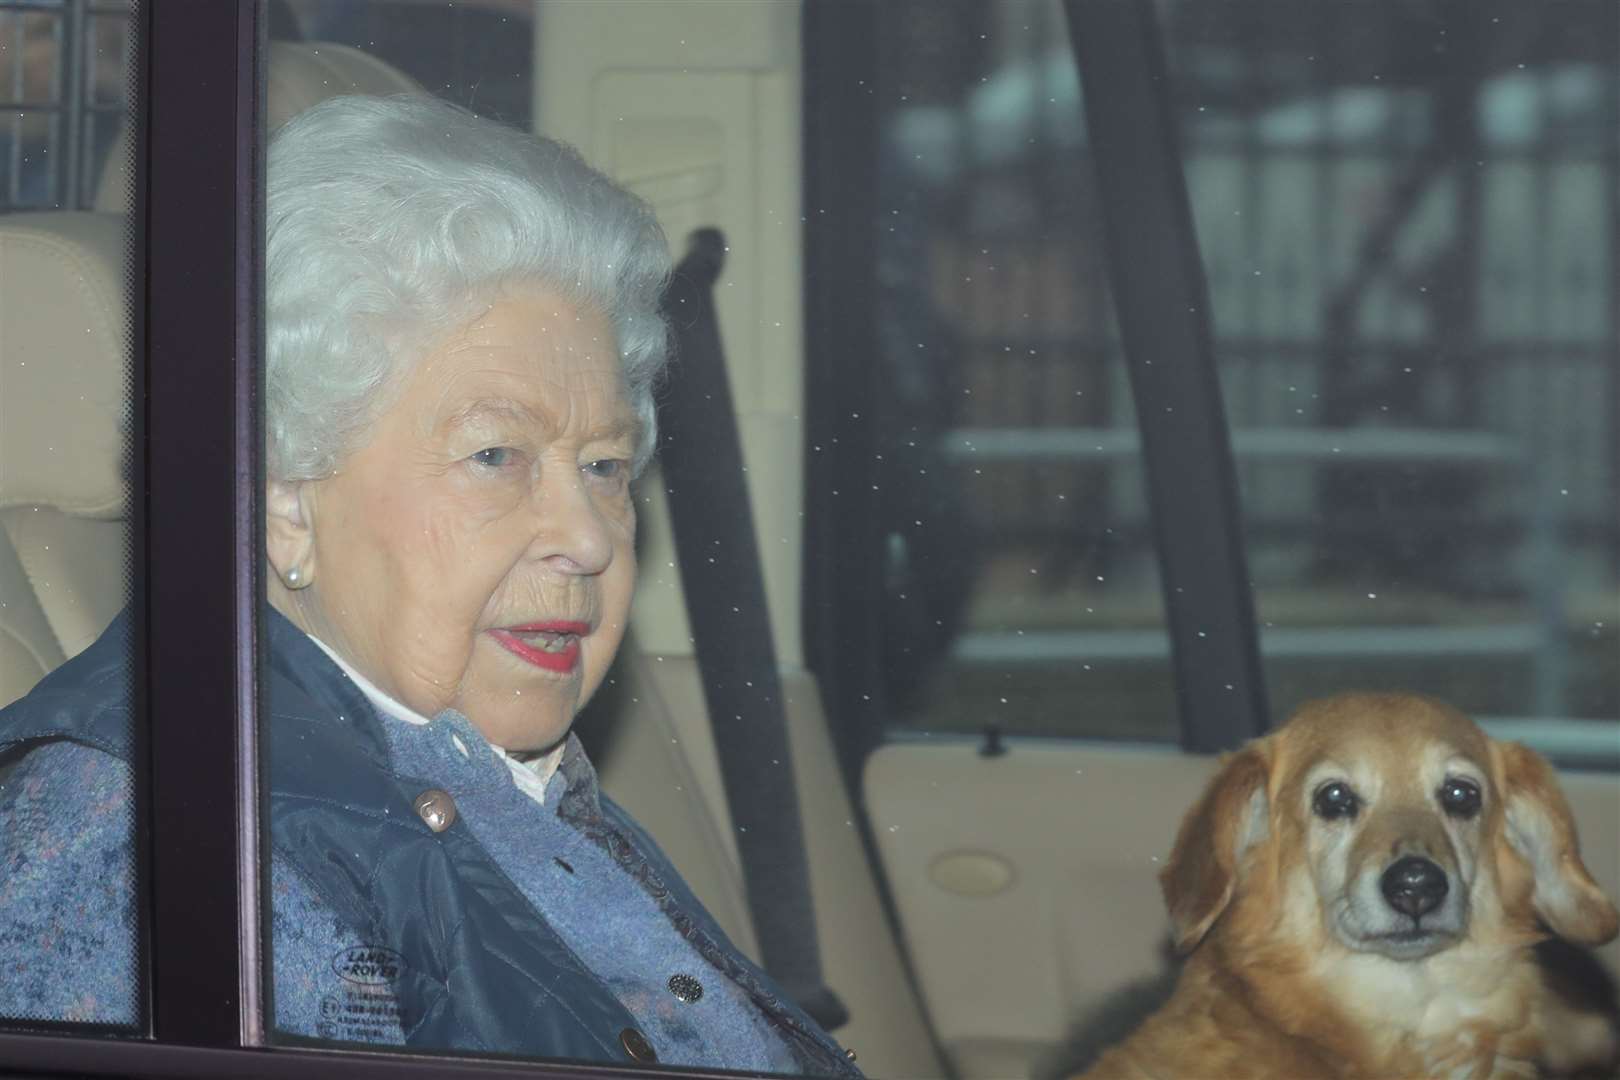 The Queen leaving Buckingham Palace for Windsor Castle in March to socially distance herself amid the coronavirus pandemic (Aaron Chown/PA)